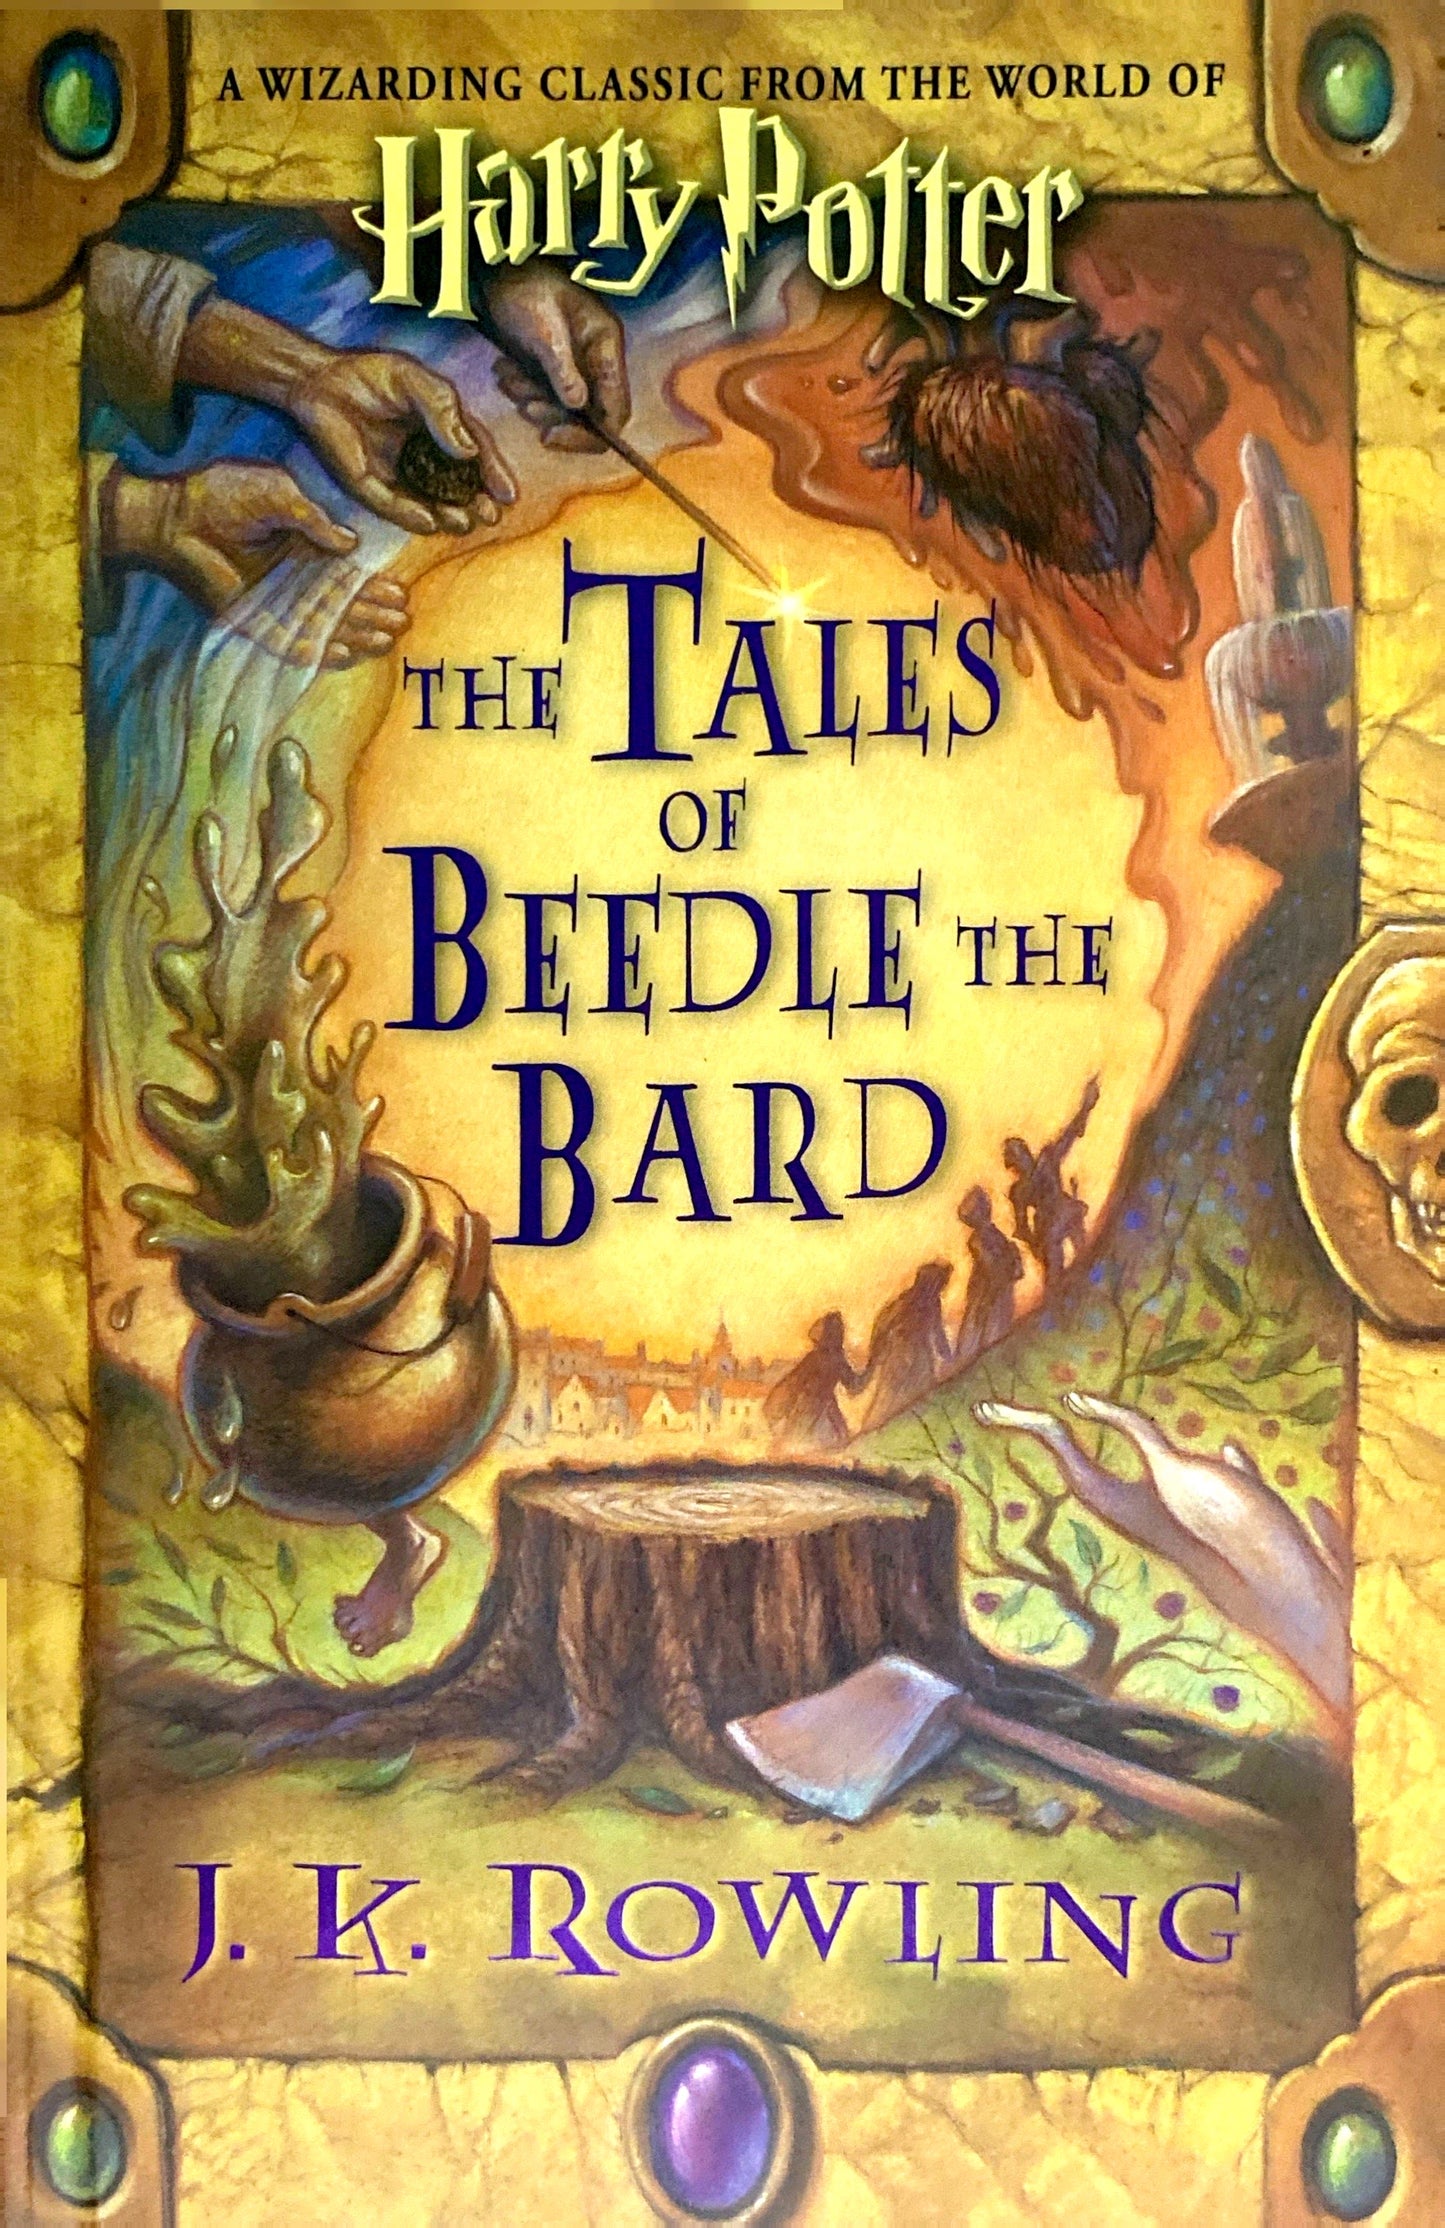 The tales of beedle the bard | J.K.Rowling